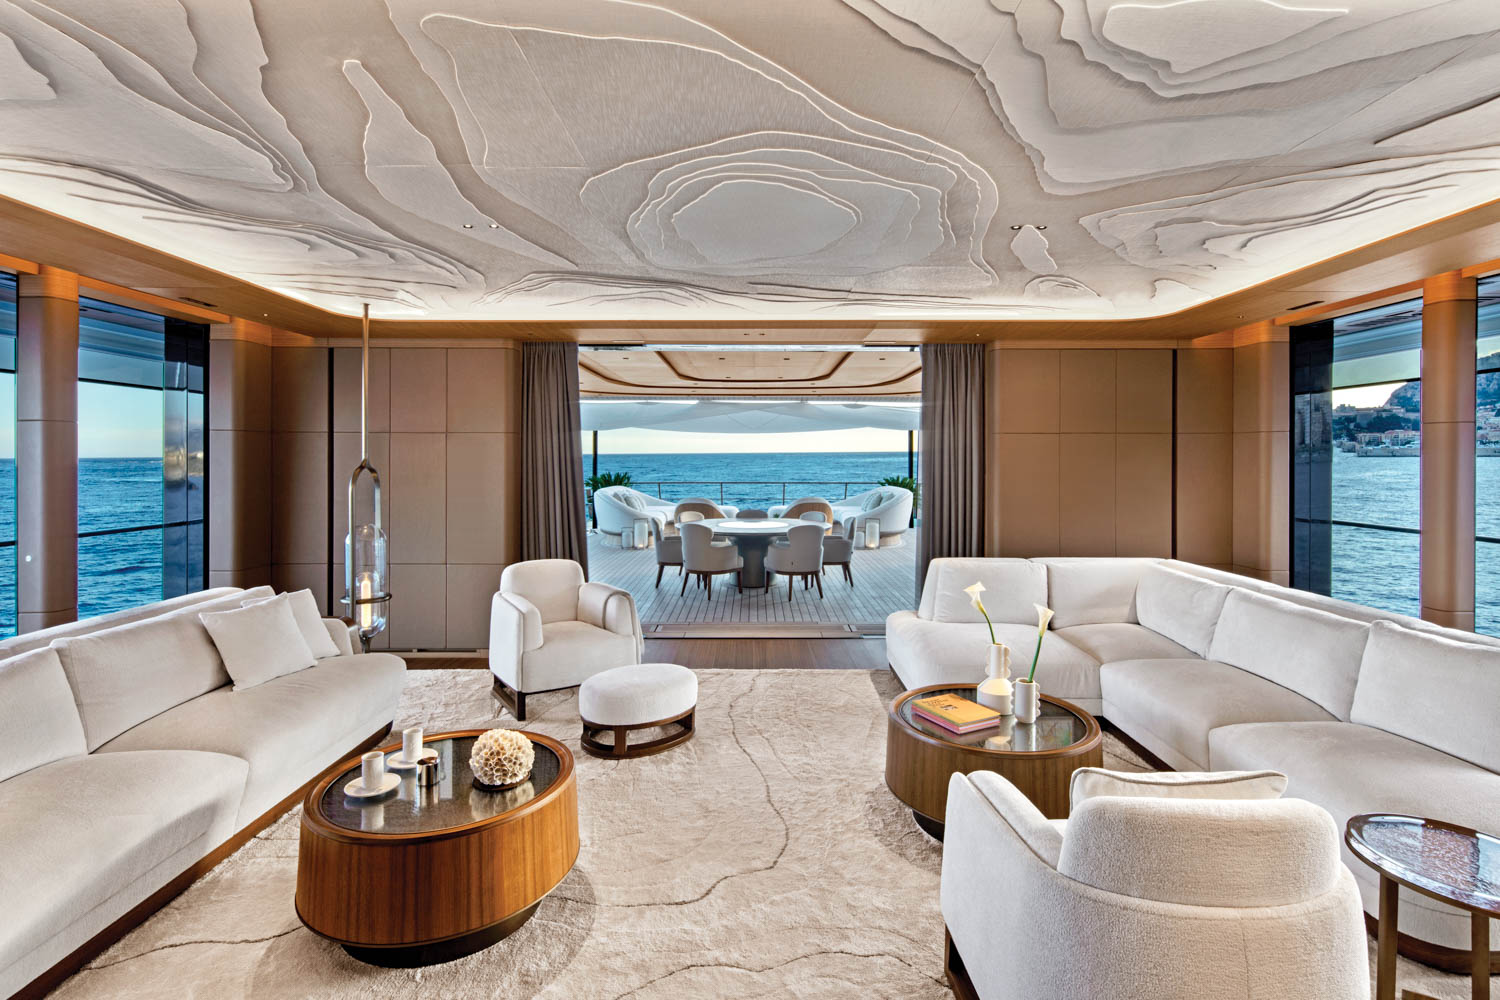 hydrographic map-inspired patterns on the ceiling and rug in a yacht's salon